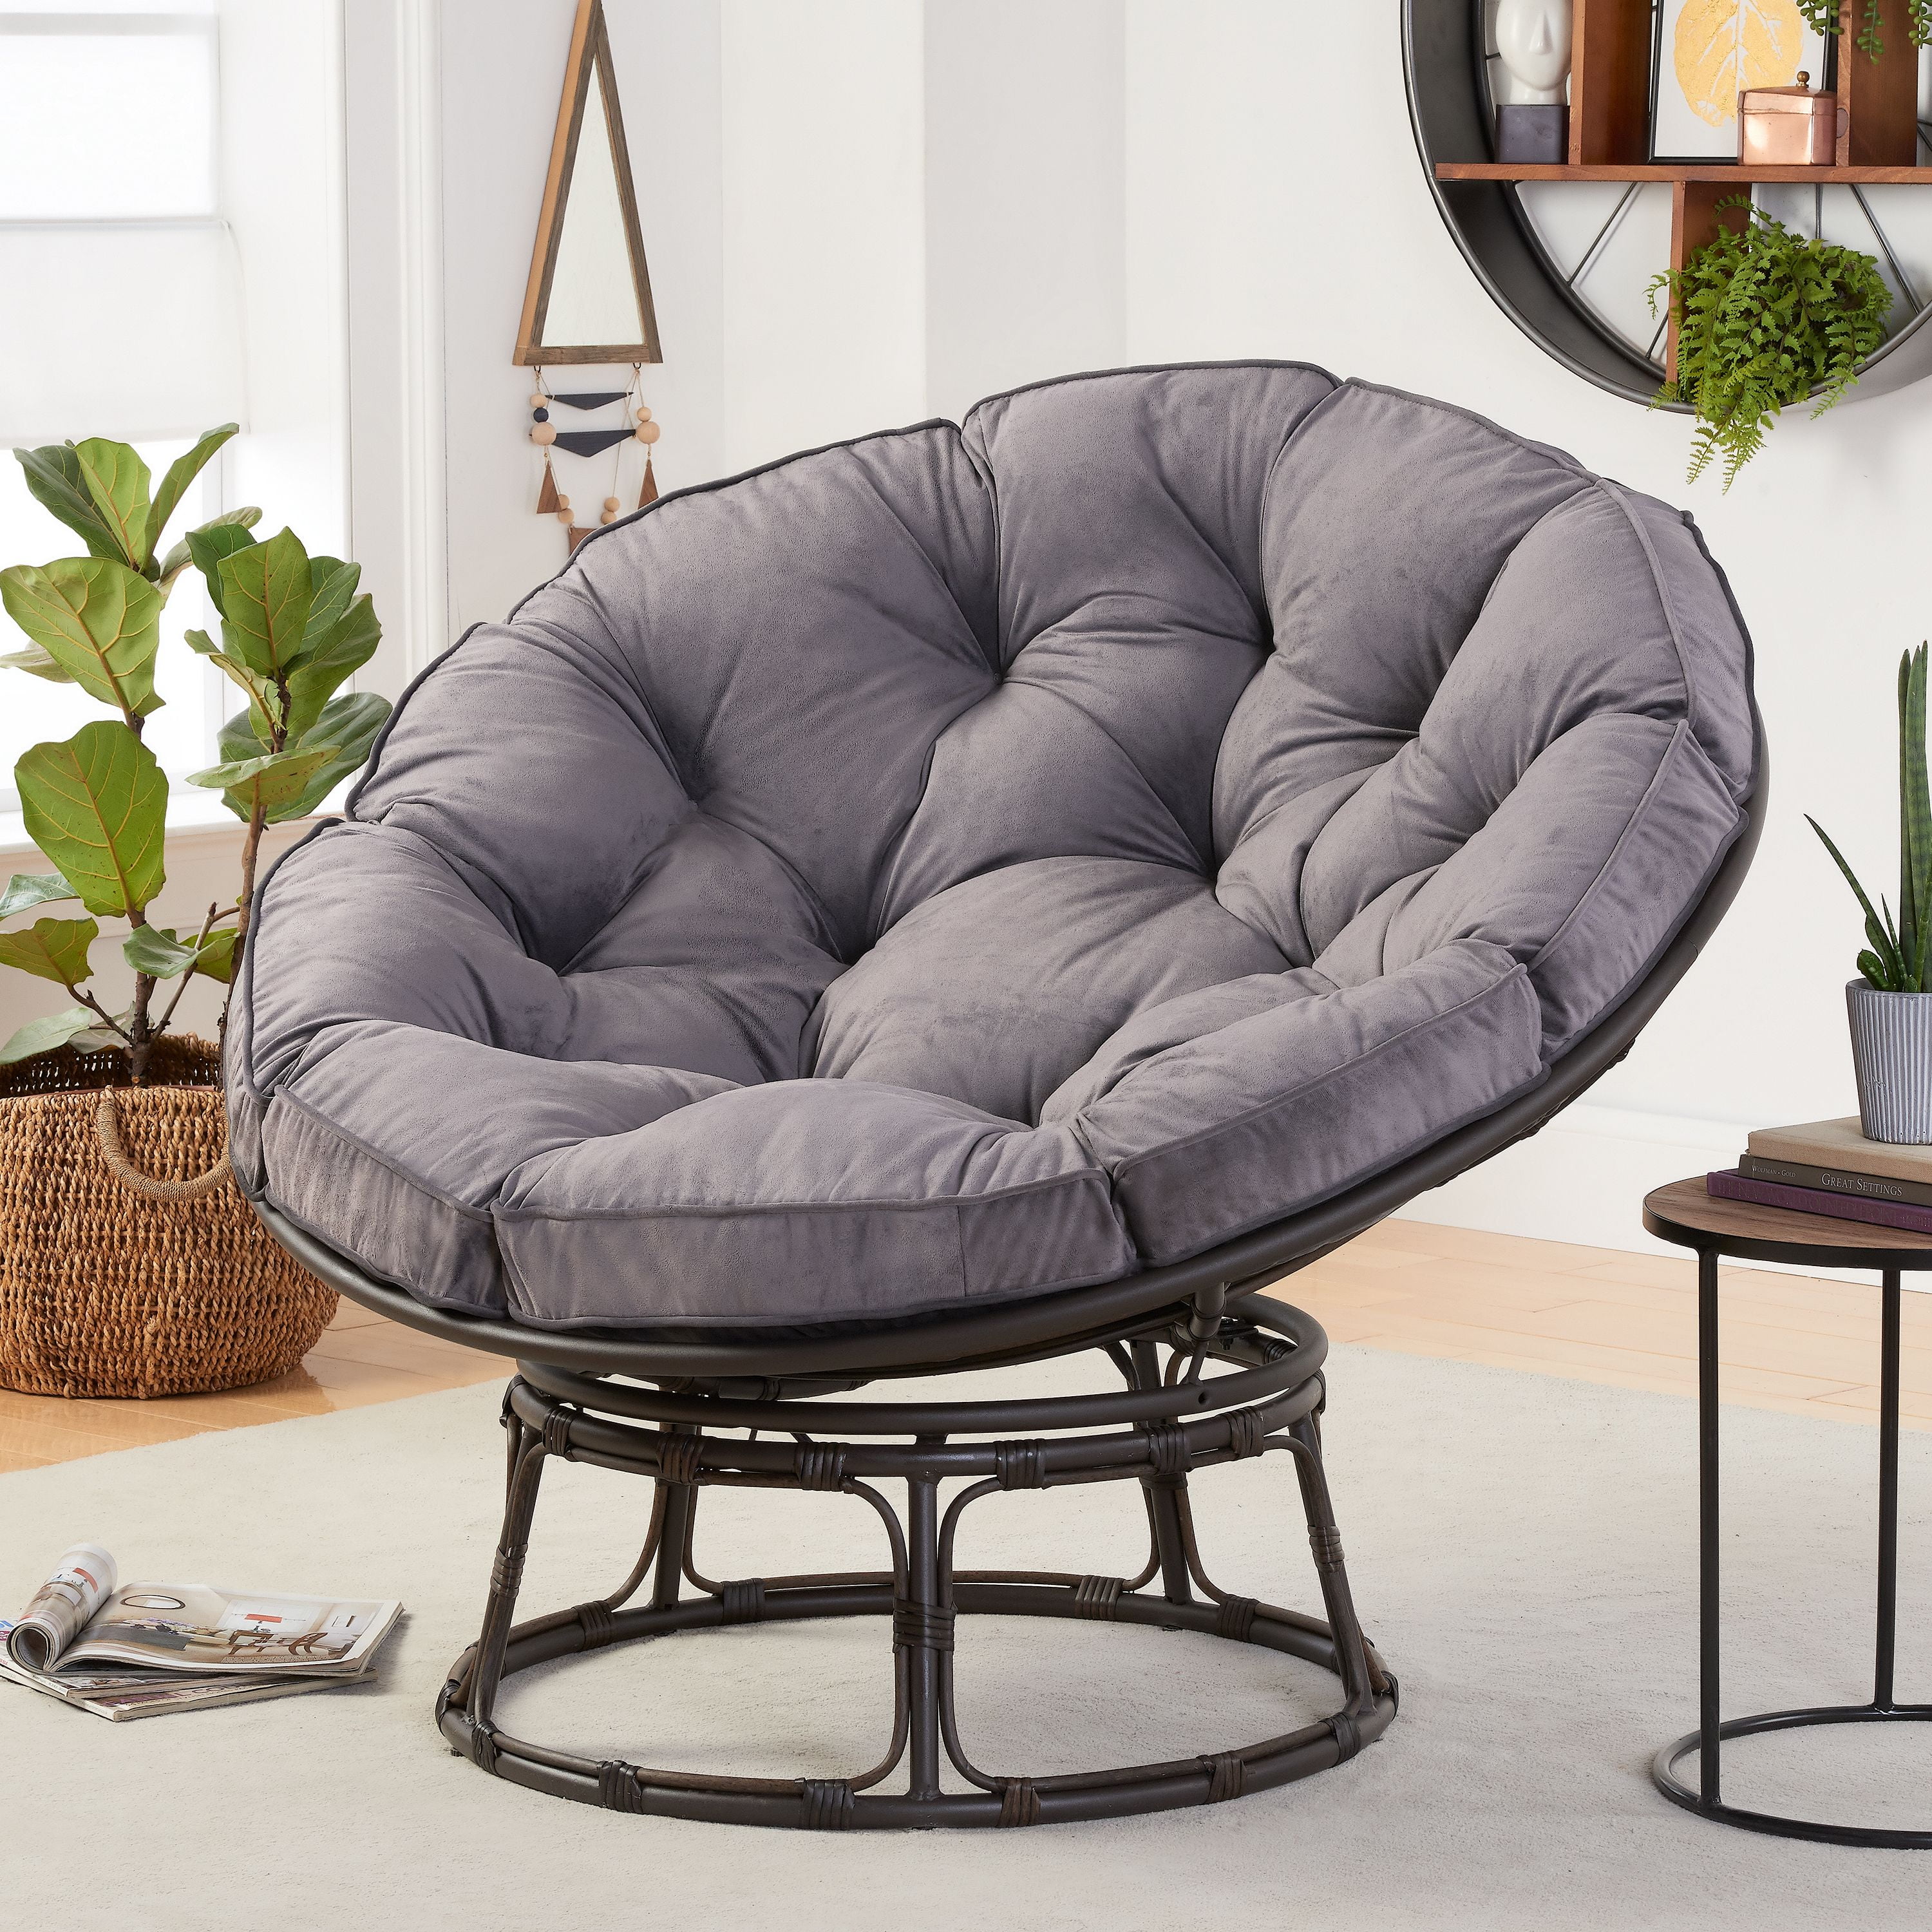 Better Homes & Gardens Papasan Chair with Vevel Fabric